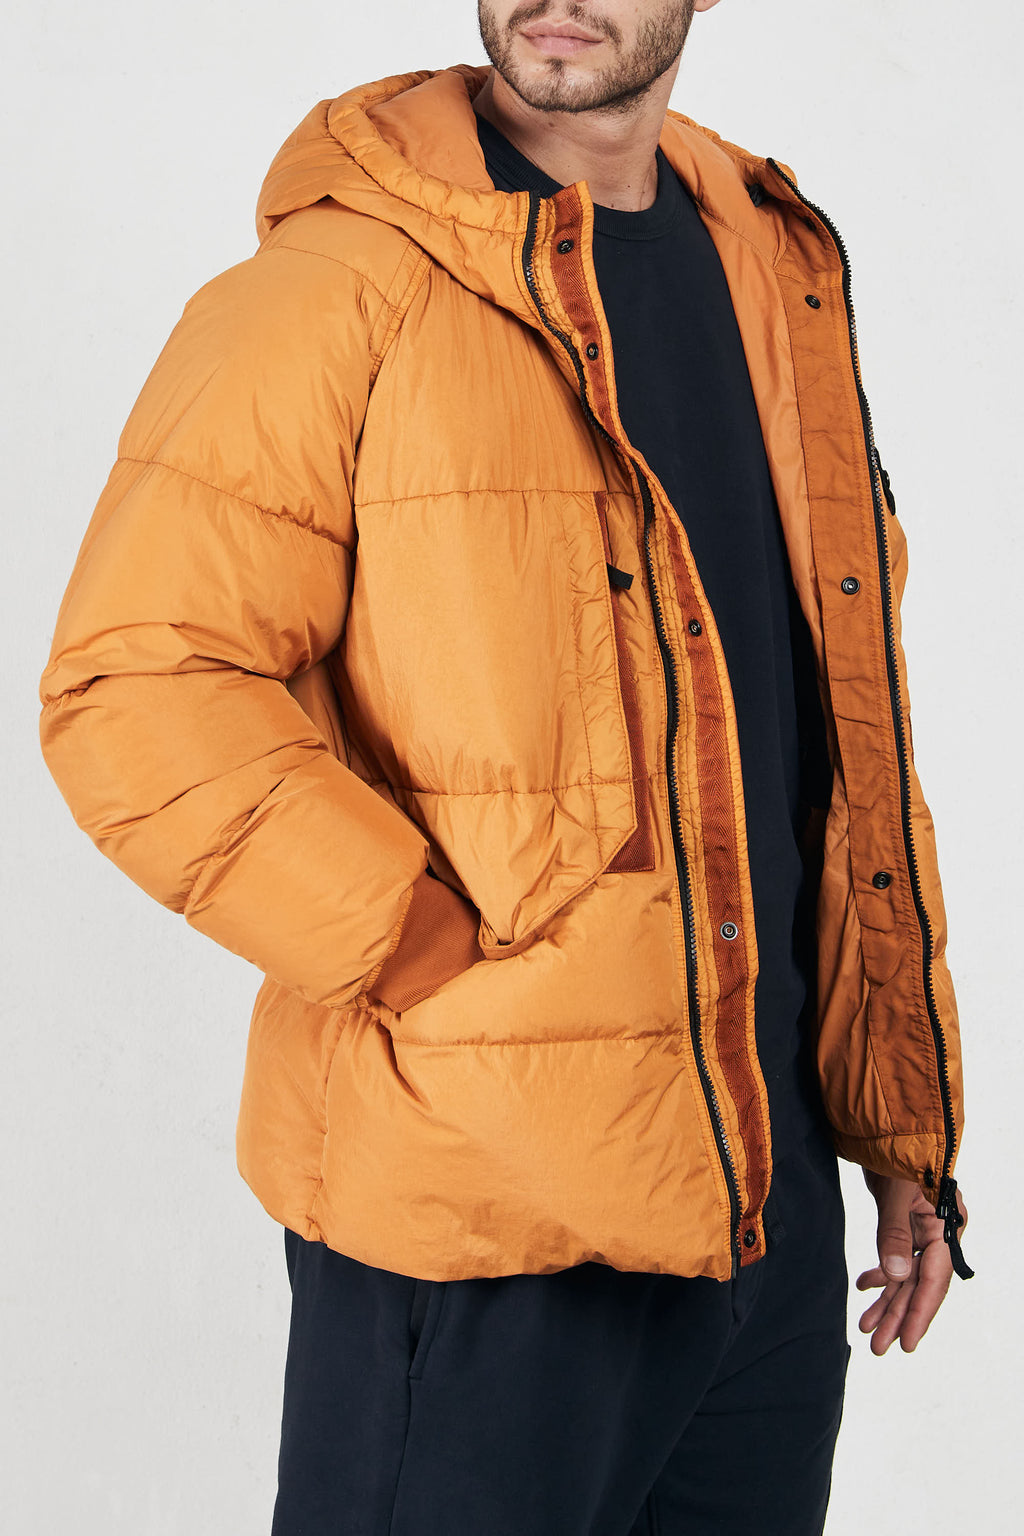 Stone Island 7699 Garment Dyed Crinkle Reps R-NY Down Down Jacket